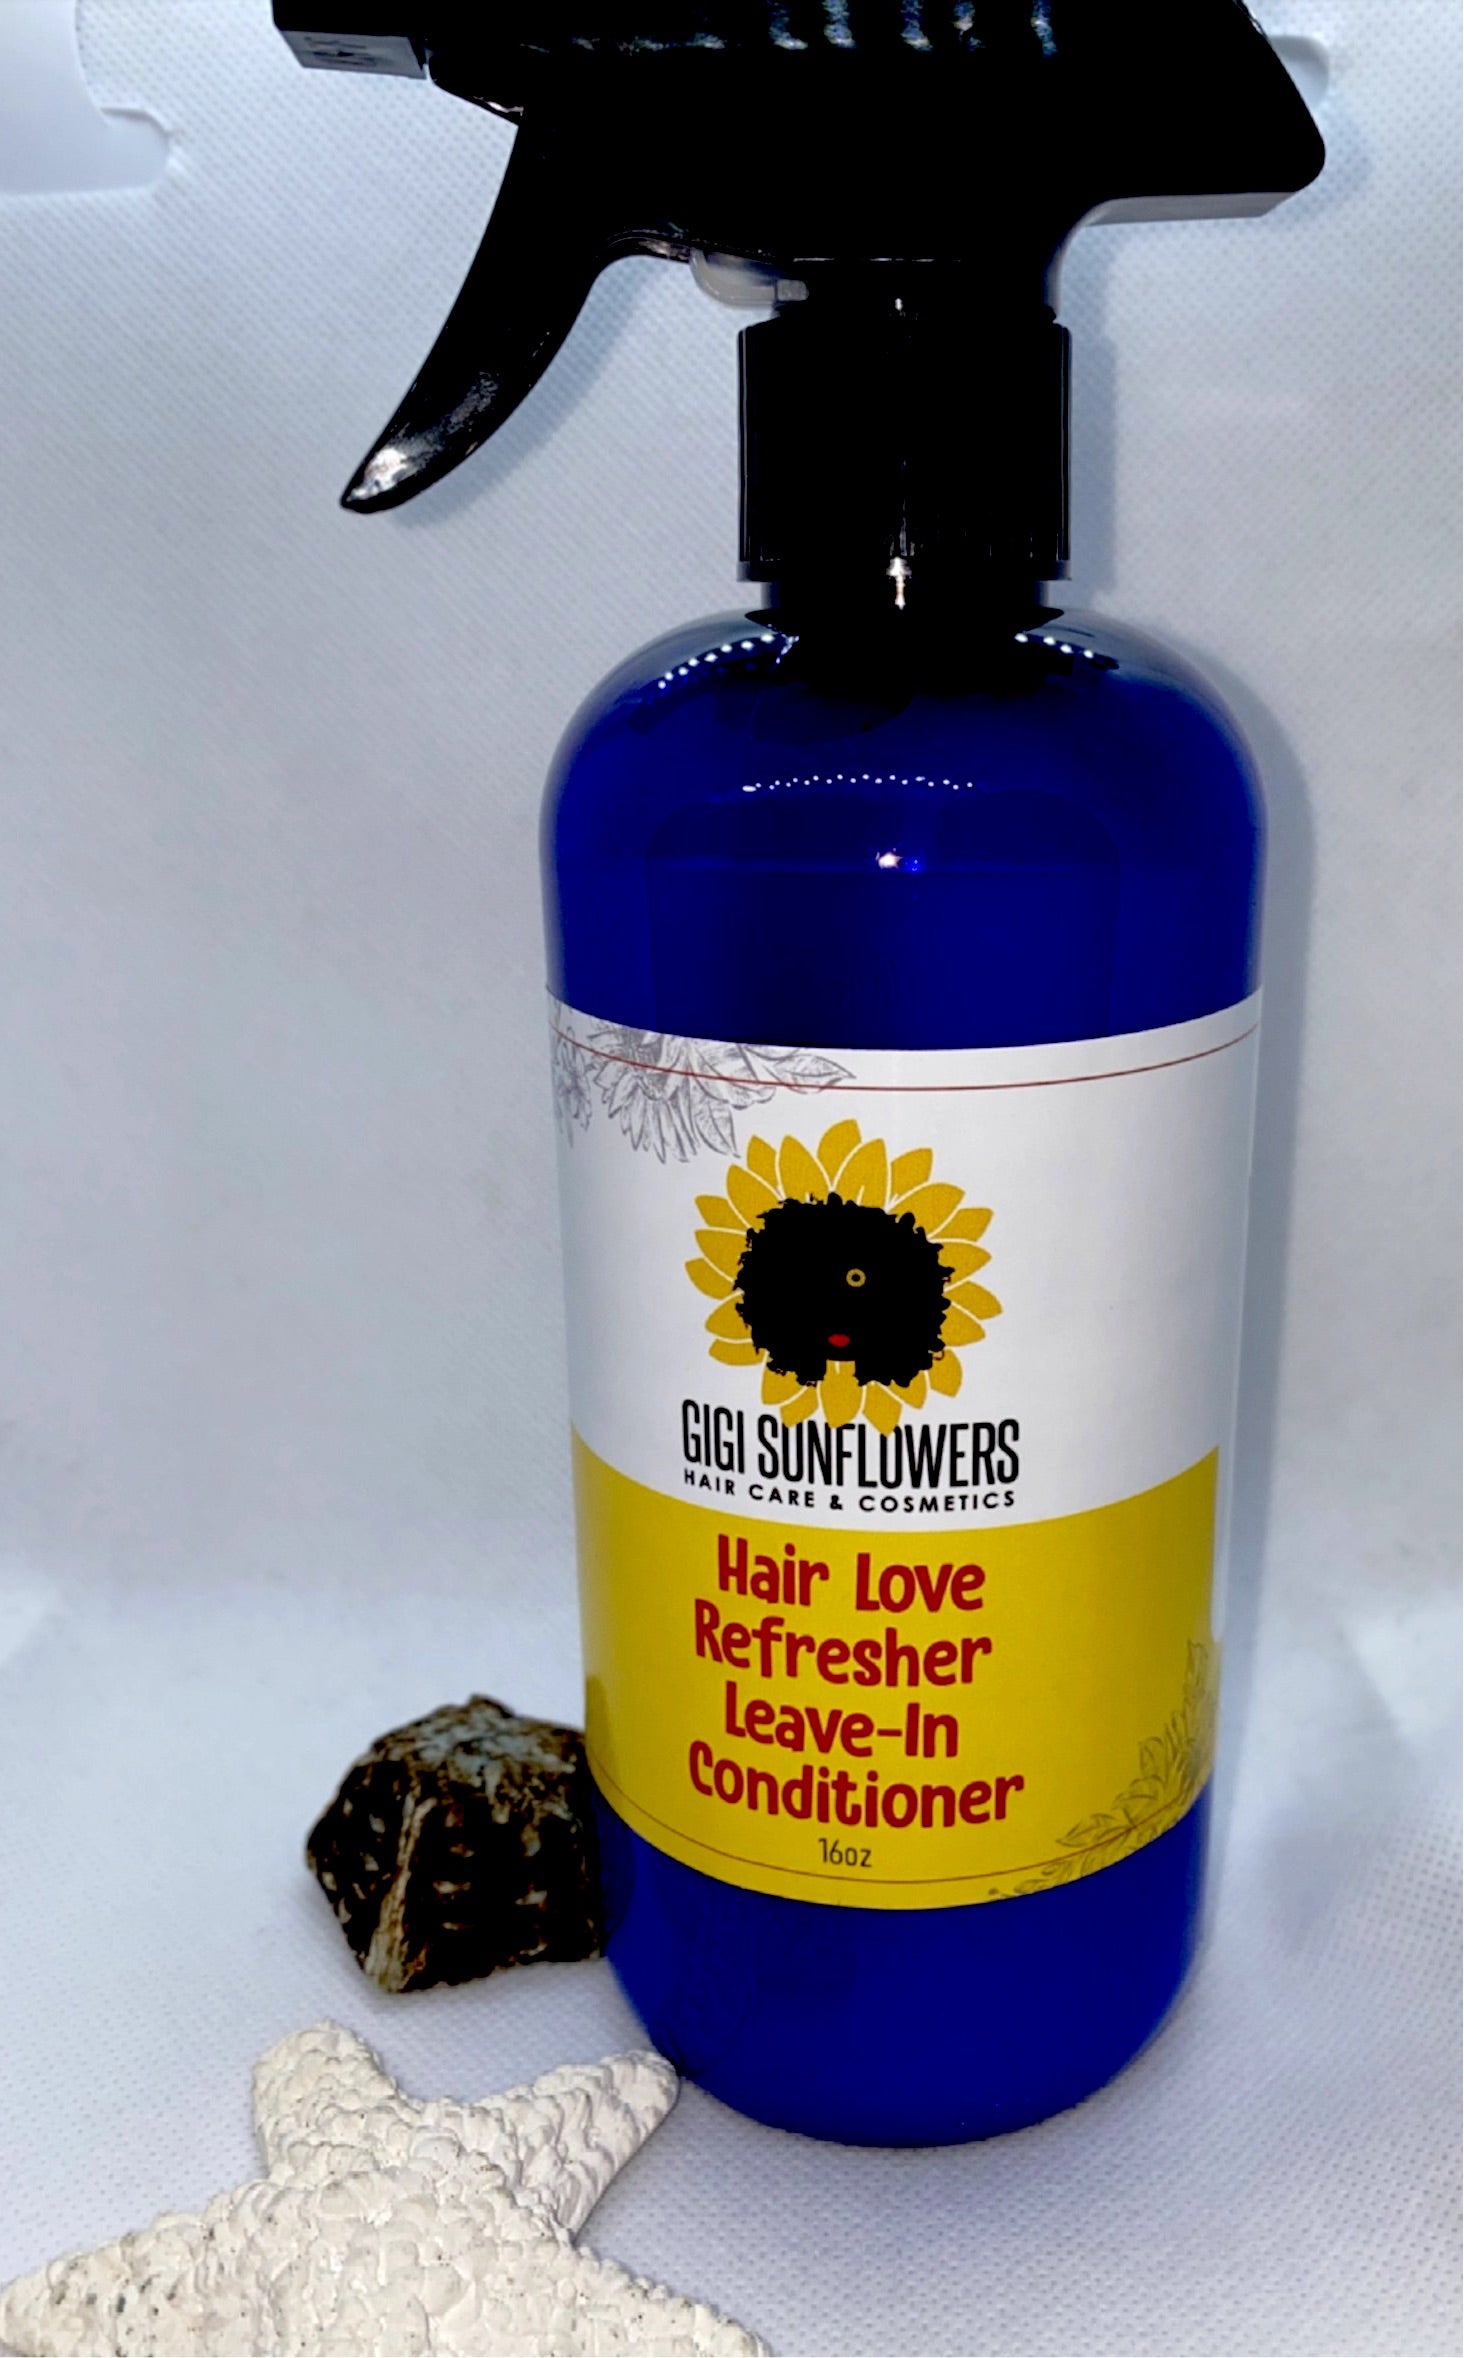 16 oz Hair Love Refresher Leave In Conditioner